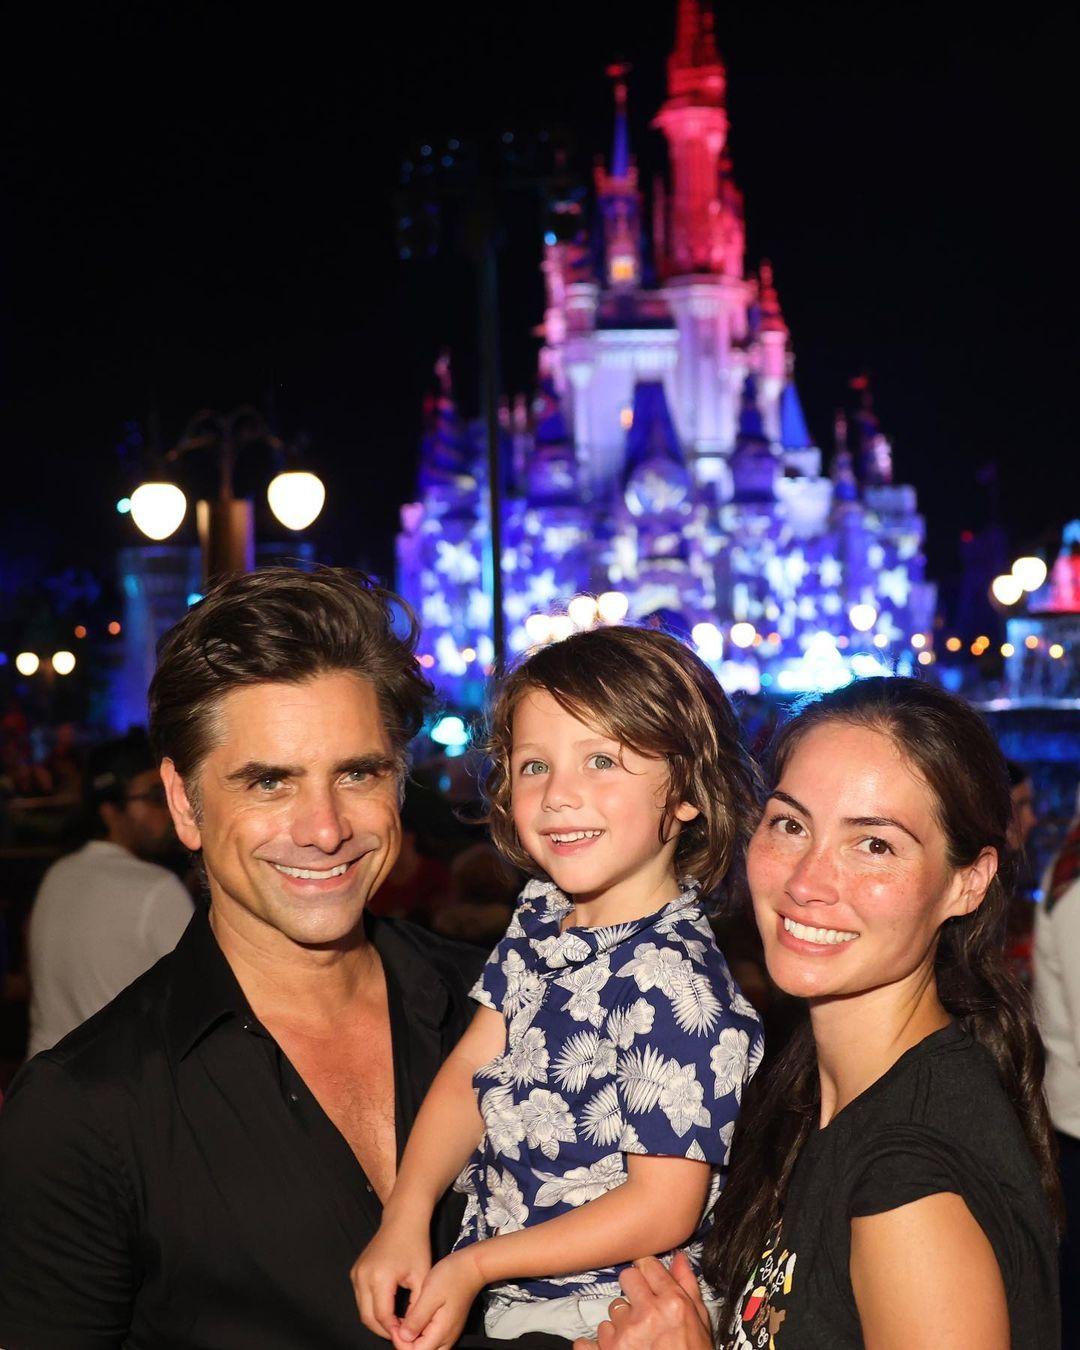 John Stamos and his wife Caitlin McHugh with their son Billy